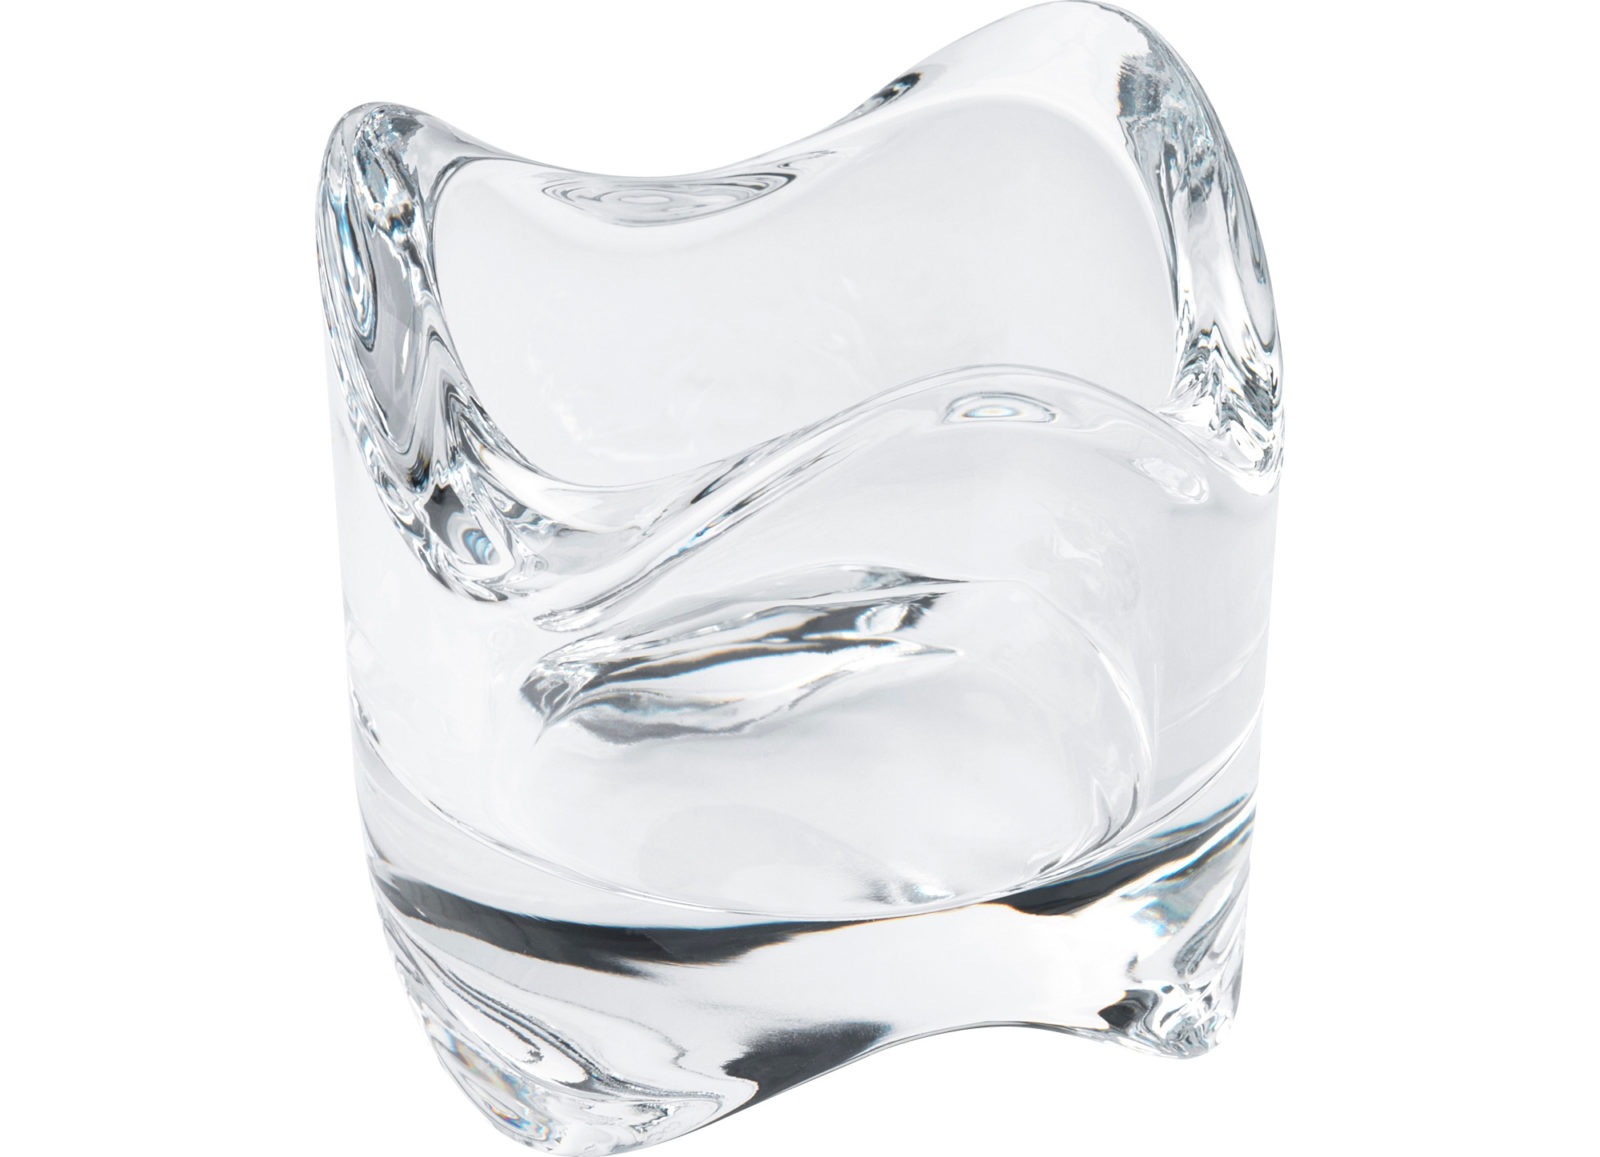 Tealight holder made of pressed clear glass in an organic rounded shape, VÄSNAS.